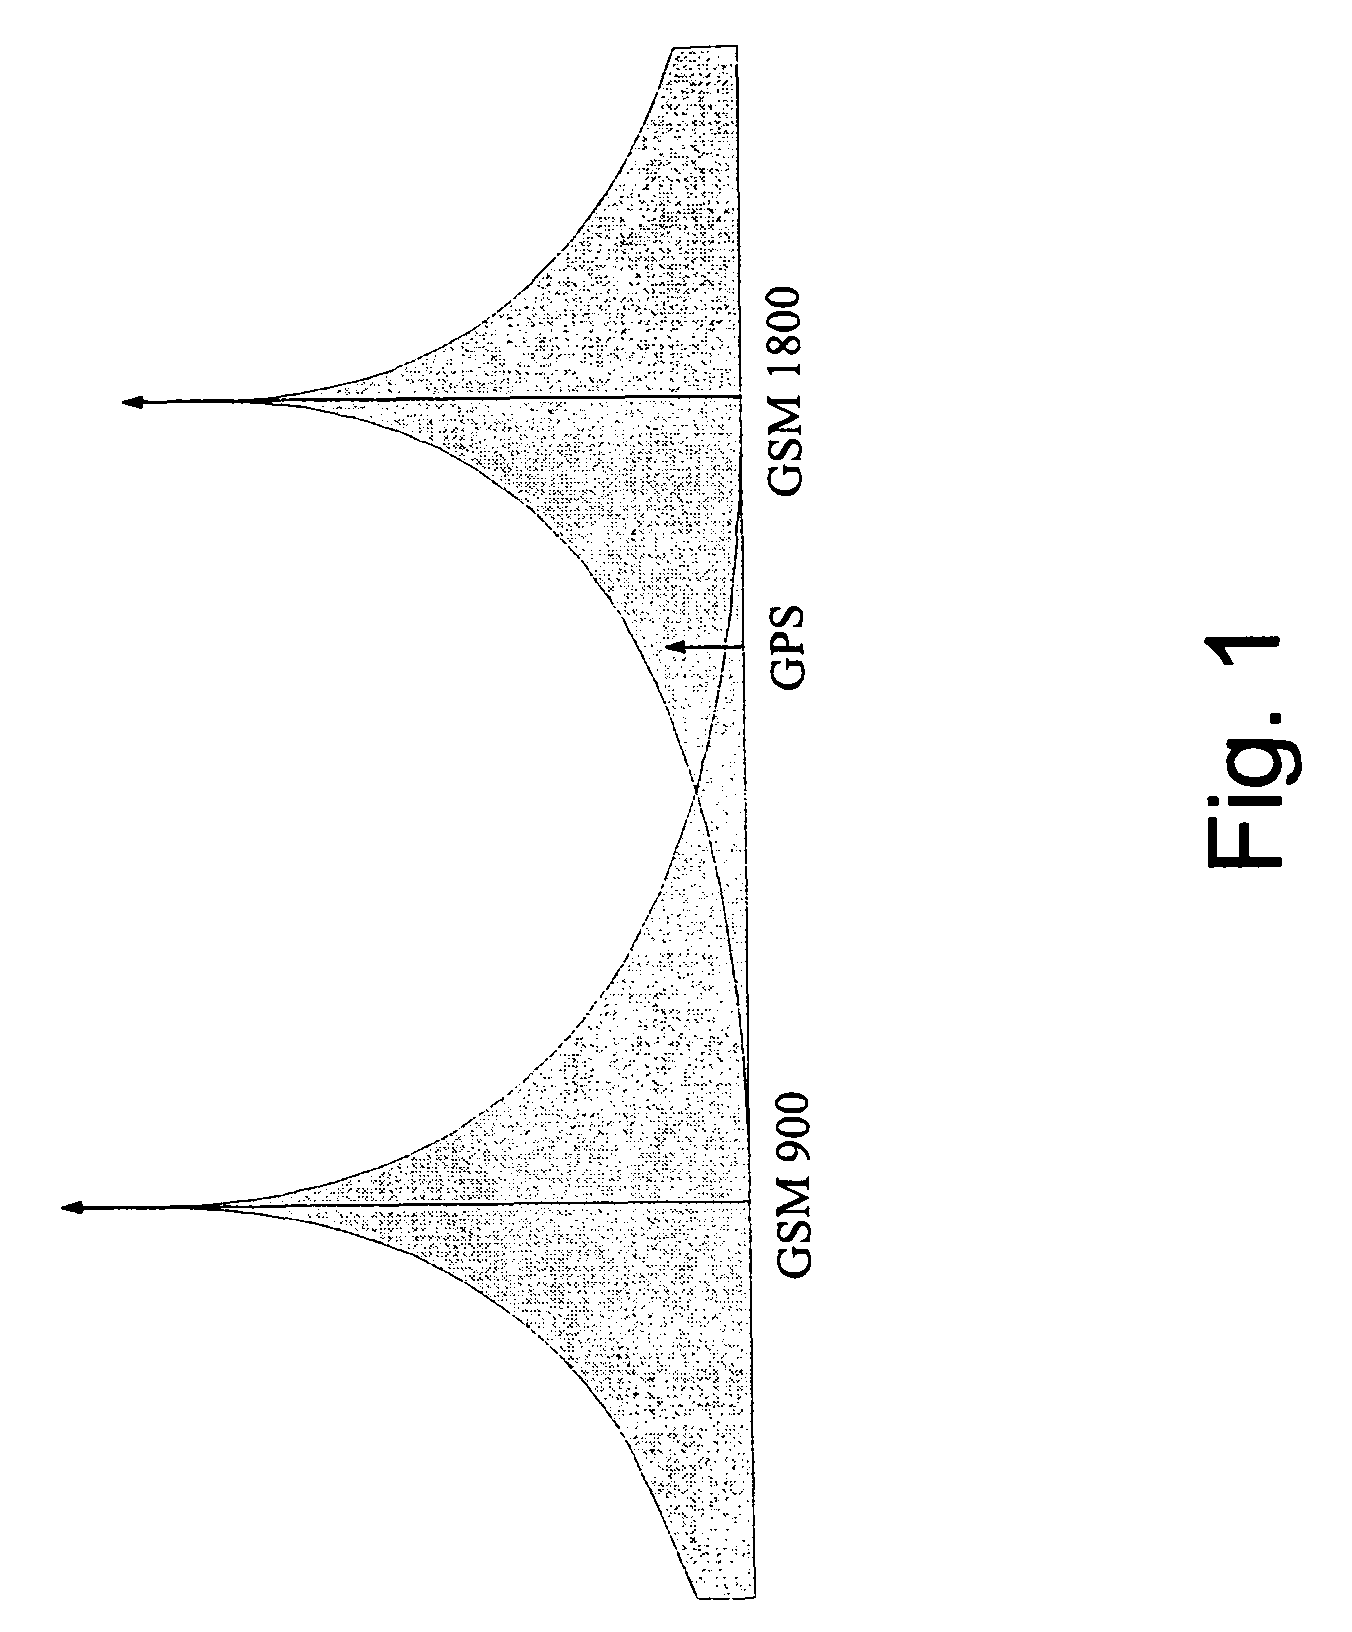 Method for reducing the effect of interferences in a receiver and an electronic device